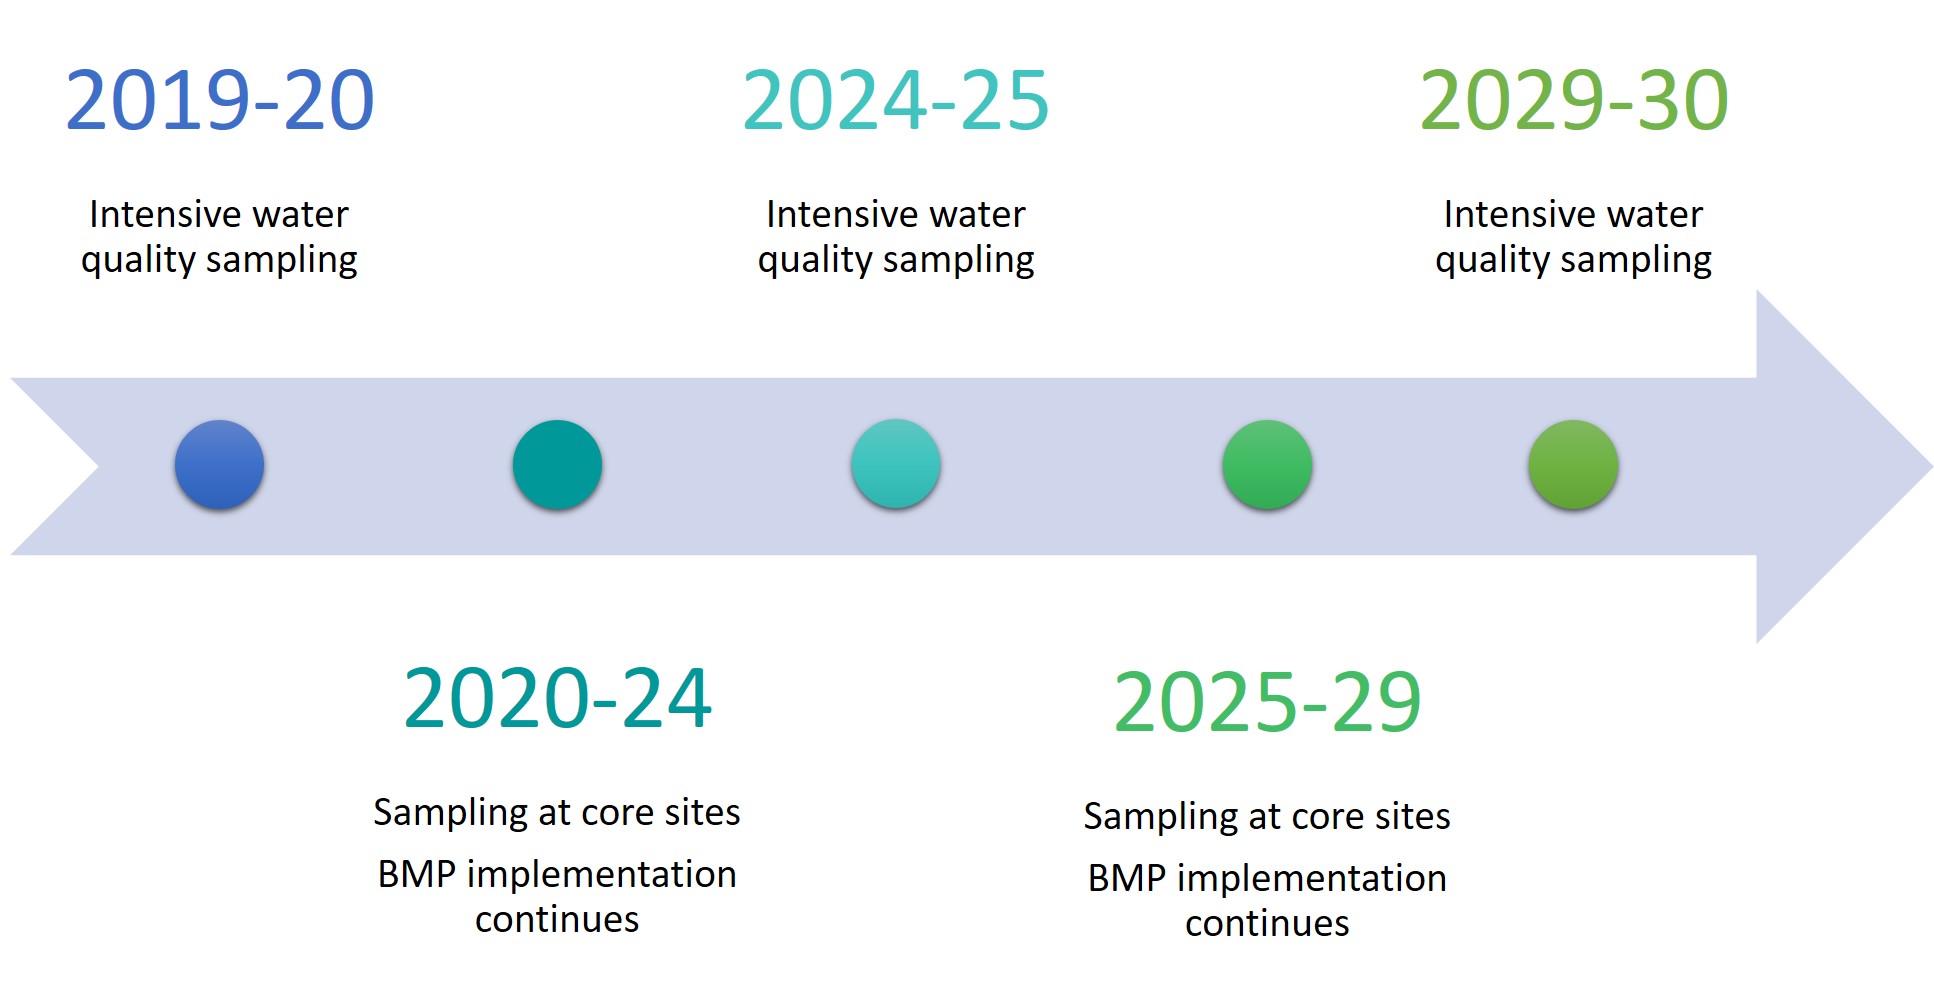 Timeline: Intensive water quality sampling for 2019-20, 2024-25, 2029-30. Core site sampling and BMP implementation in the years between.